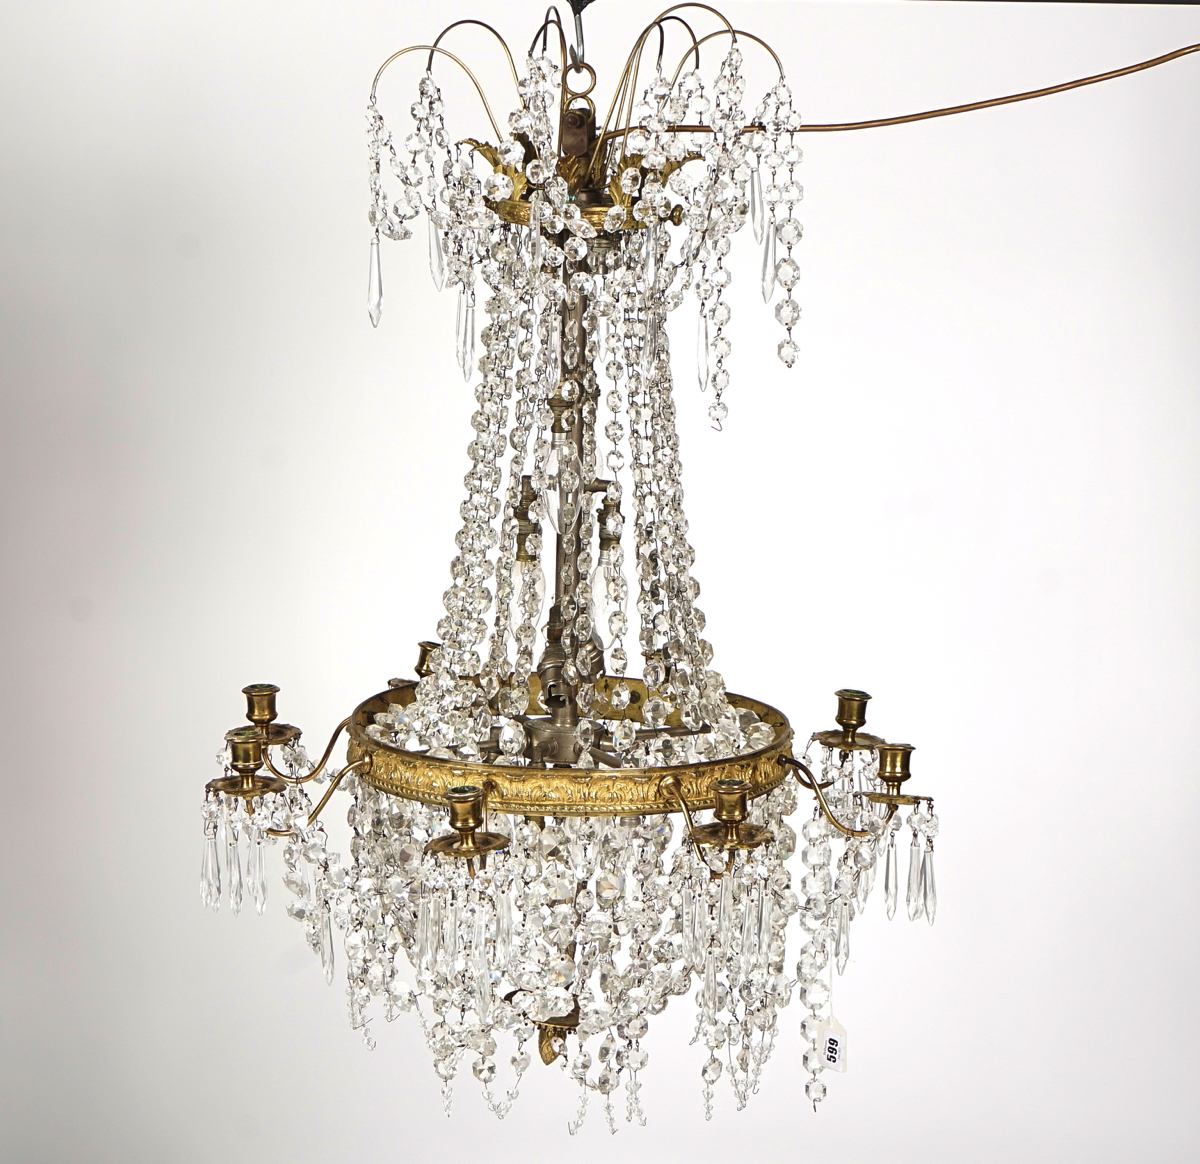 A REGENCY STYLE GILT-METAL AND CUT GLASS EIGHT-LIGHT CHANDELIER - Image 2 of 5